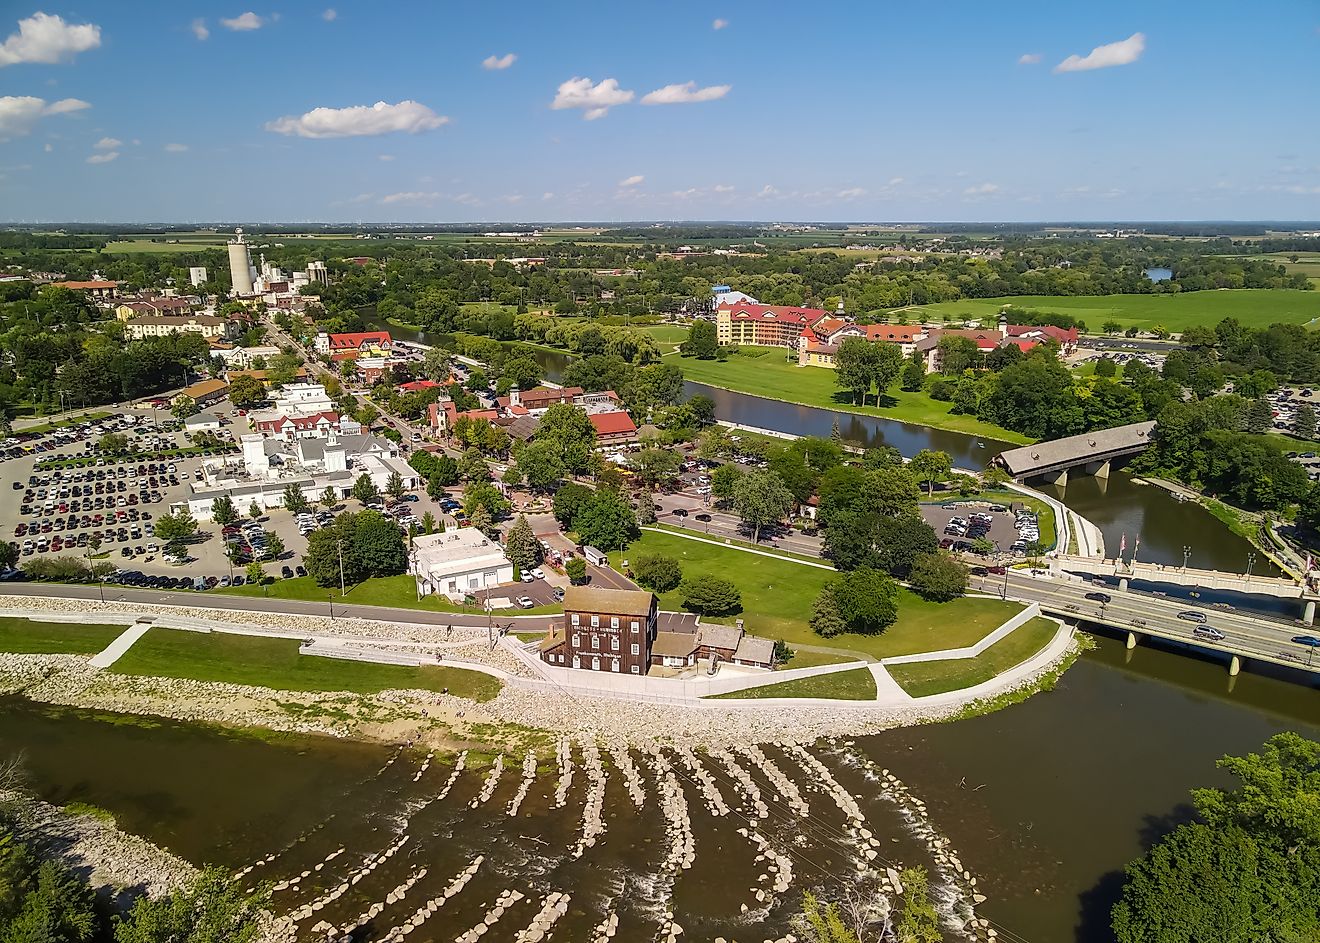 Aerial view of Frankenmuth city in Michigan. Editorial credit: SNEHIT PHOTO / Shutterstock.com.